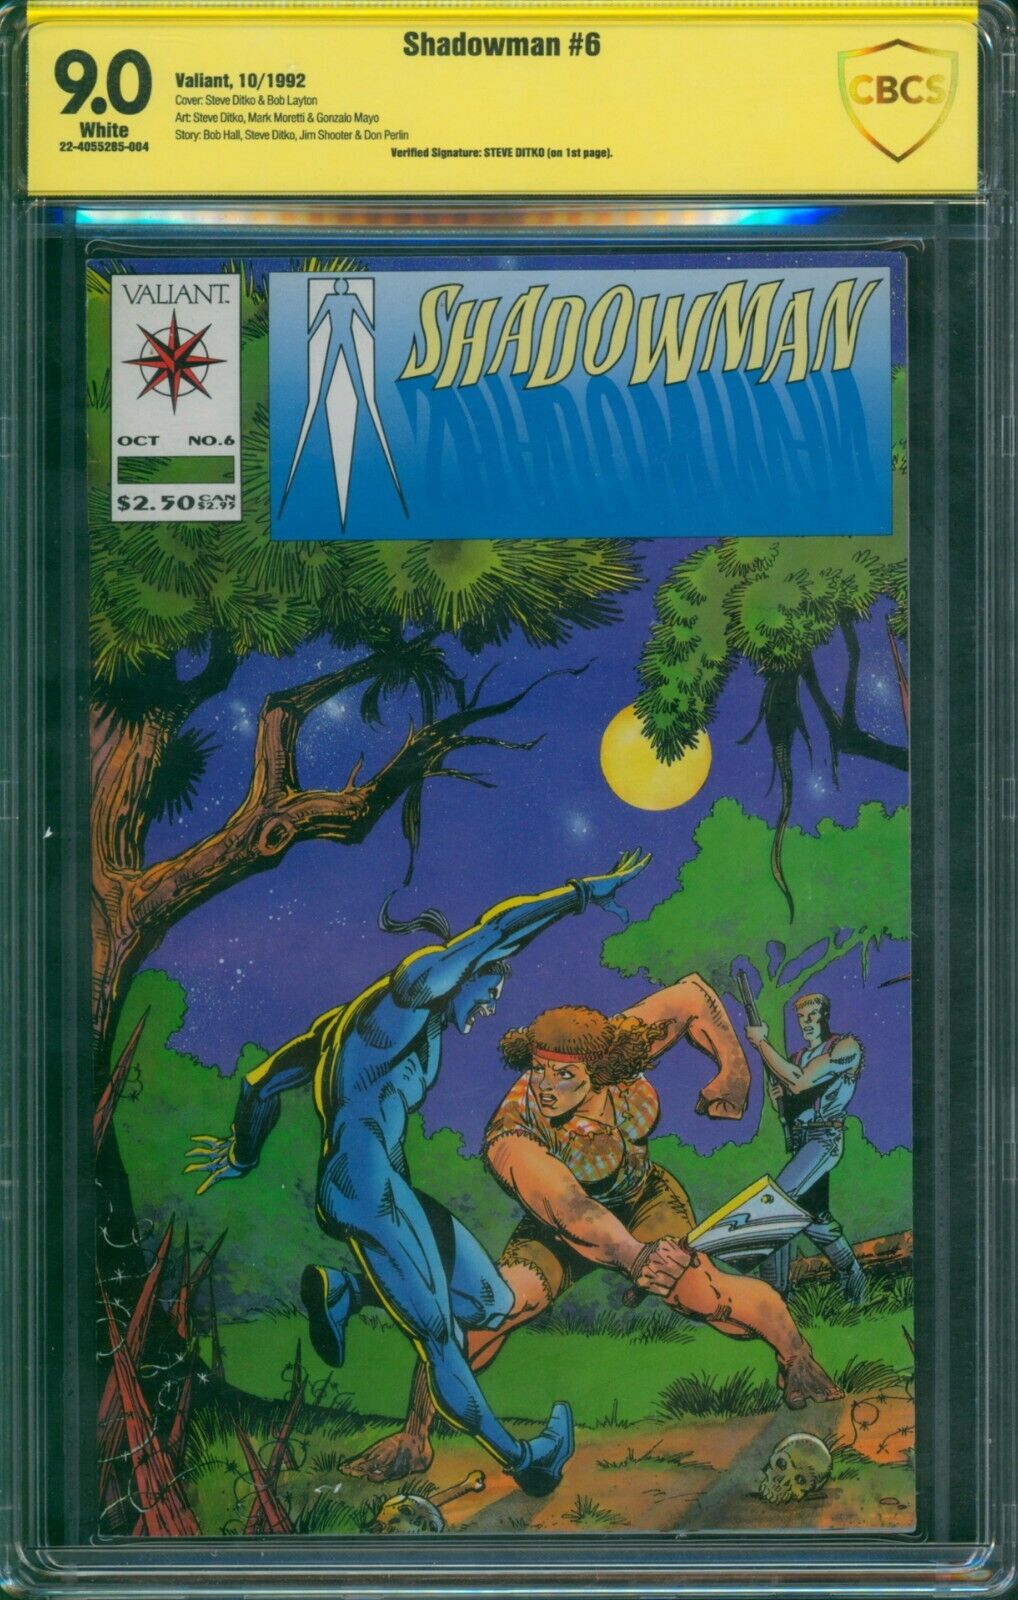 Shadowman #6 ⭐ SIGNED by STEVE DITKO - Authenticated ⭐ Rare Signature CBCS 9.0